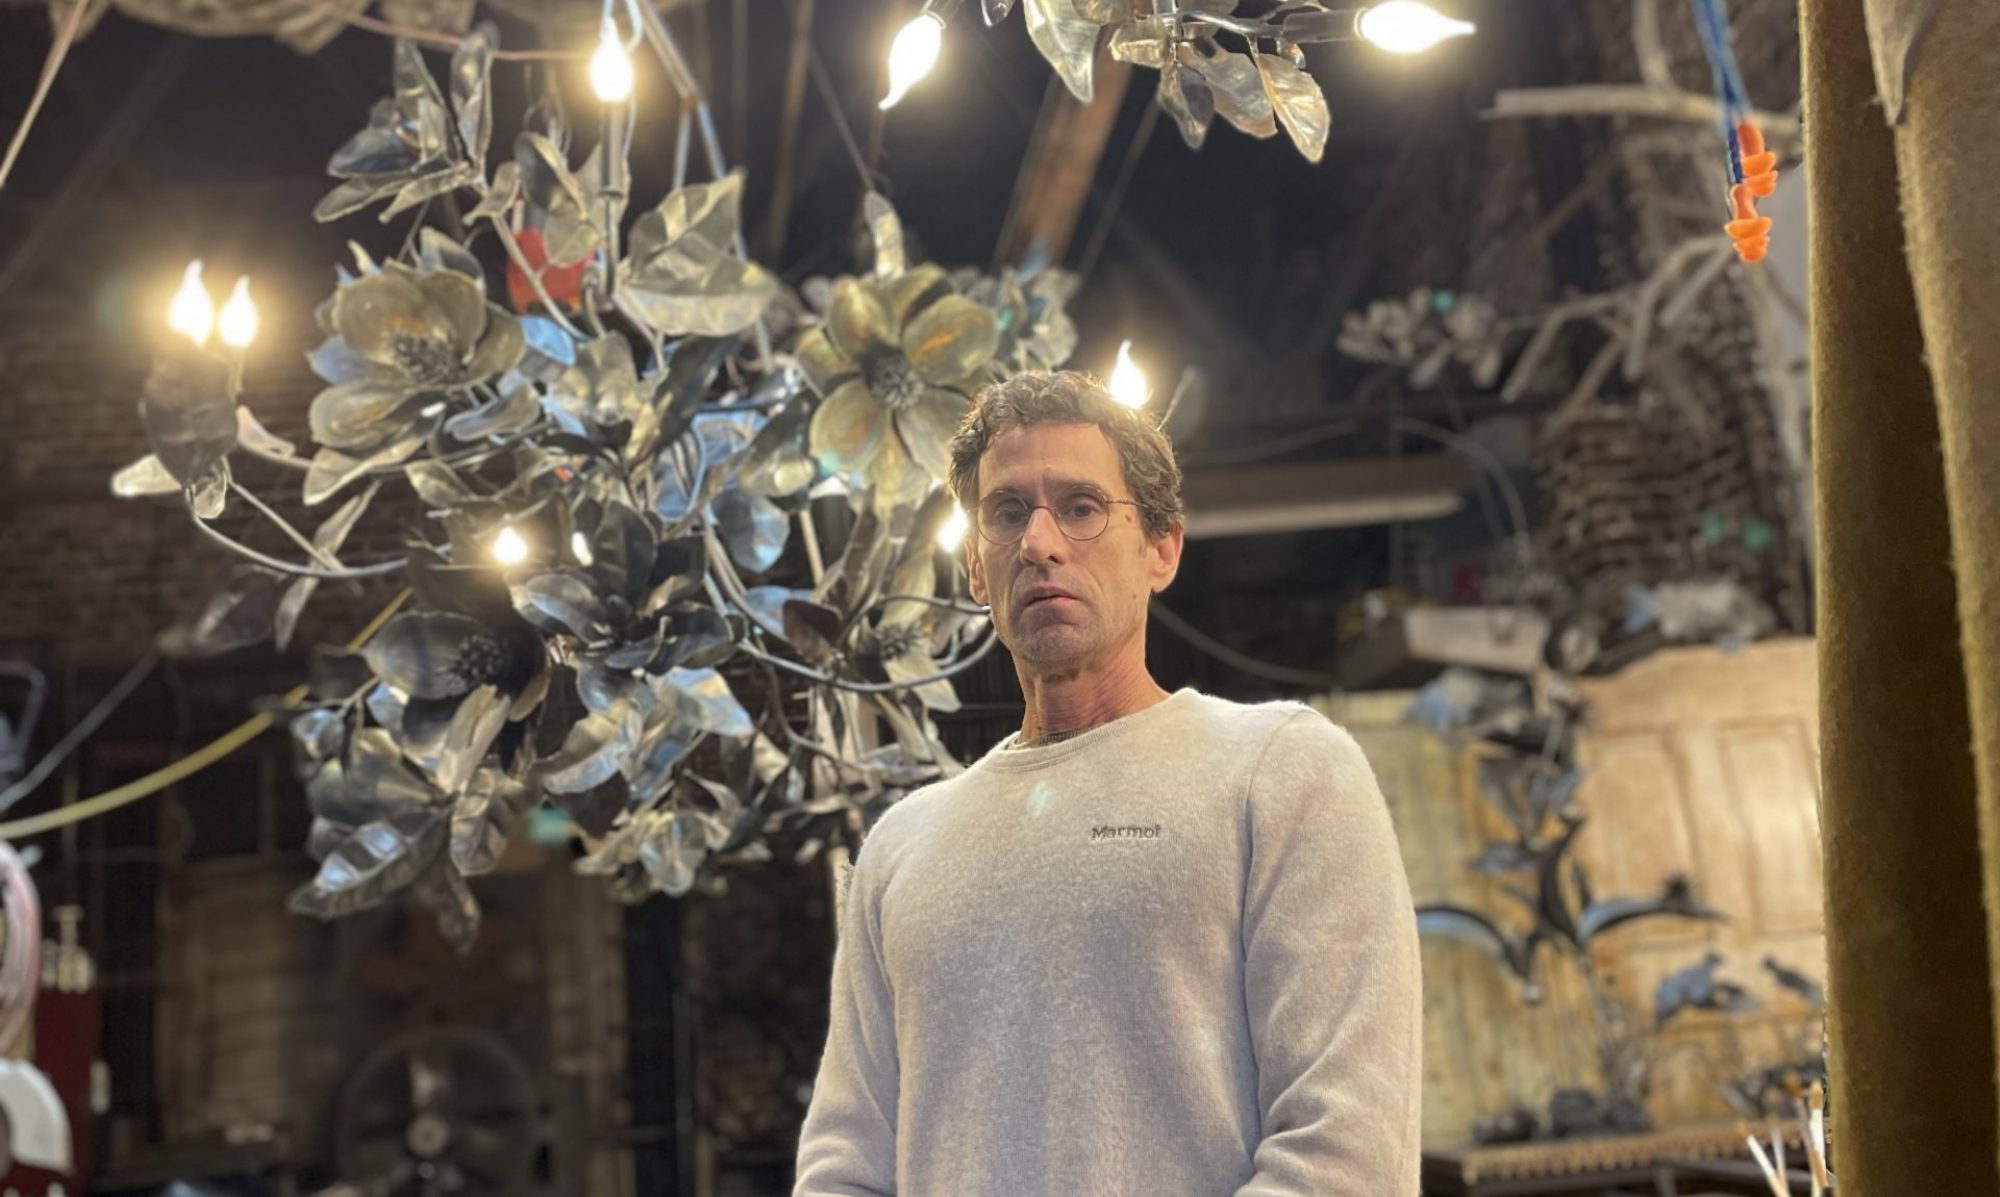 David C. Rockhold of New Orleans  Furniture and Sculpture in Metal